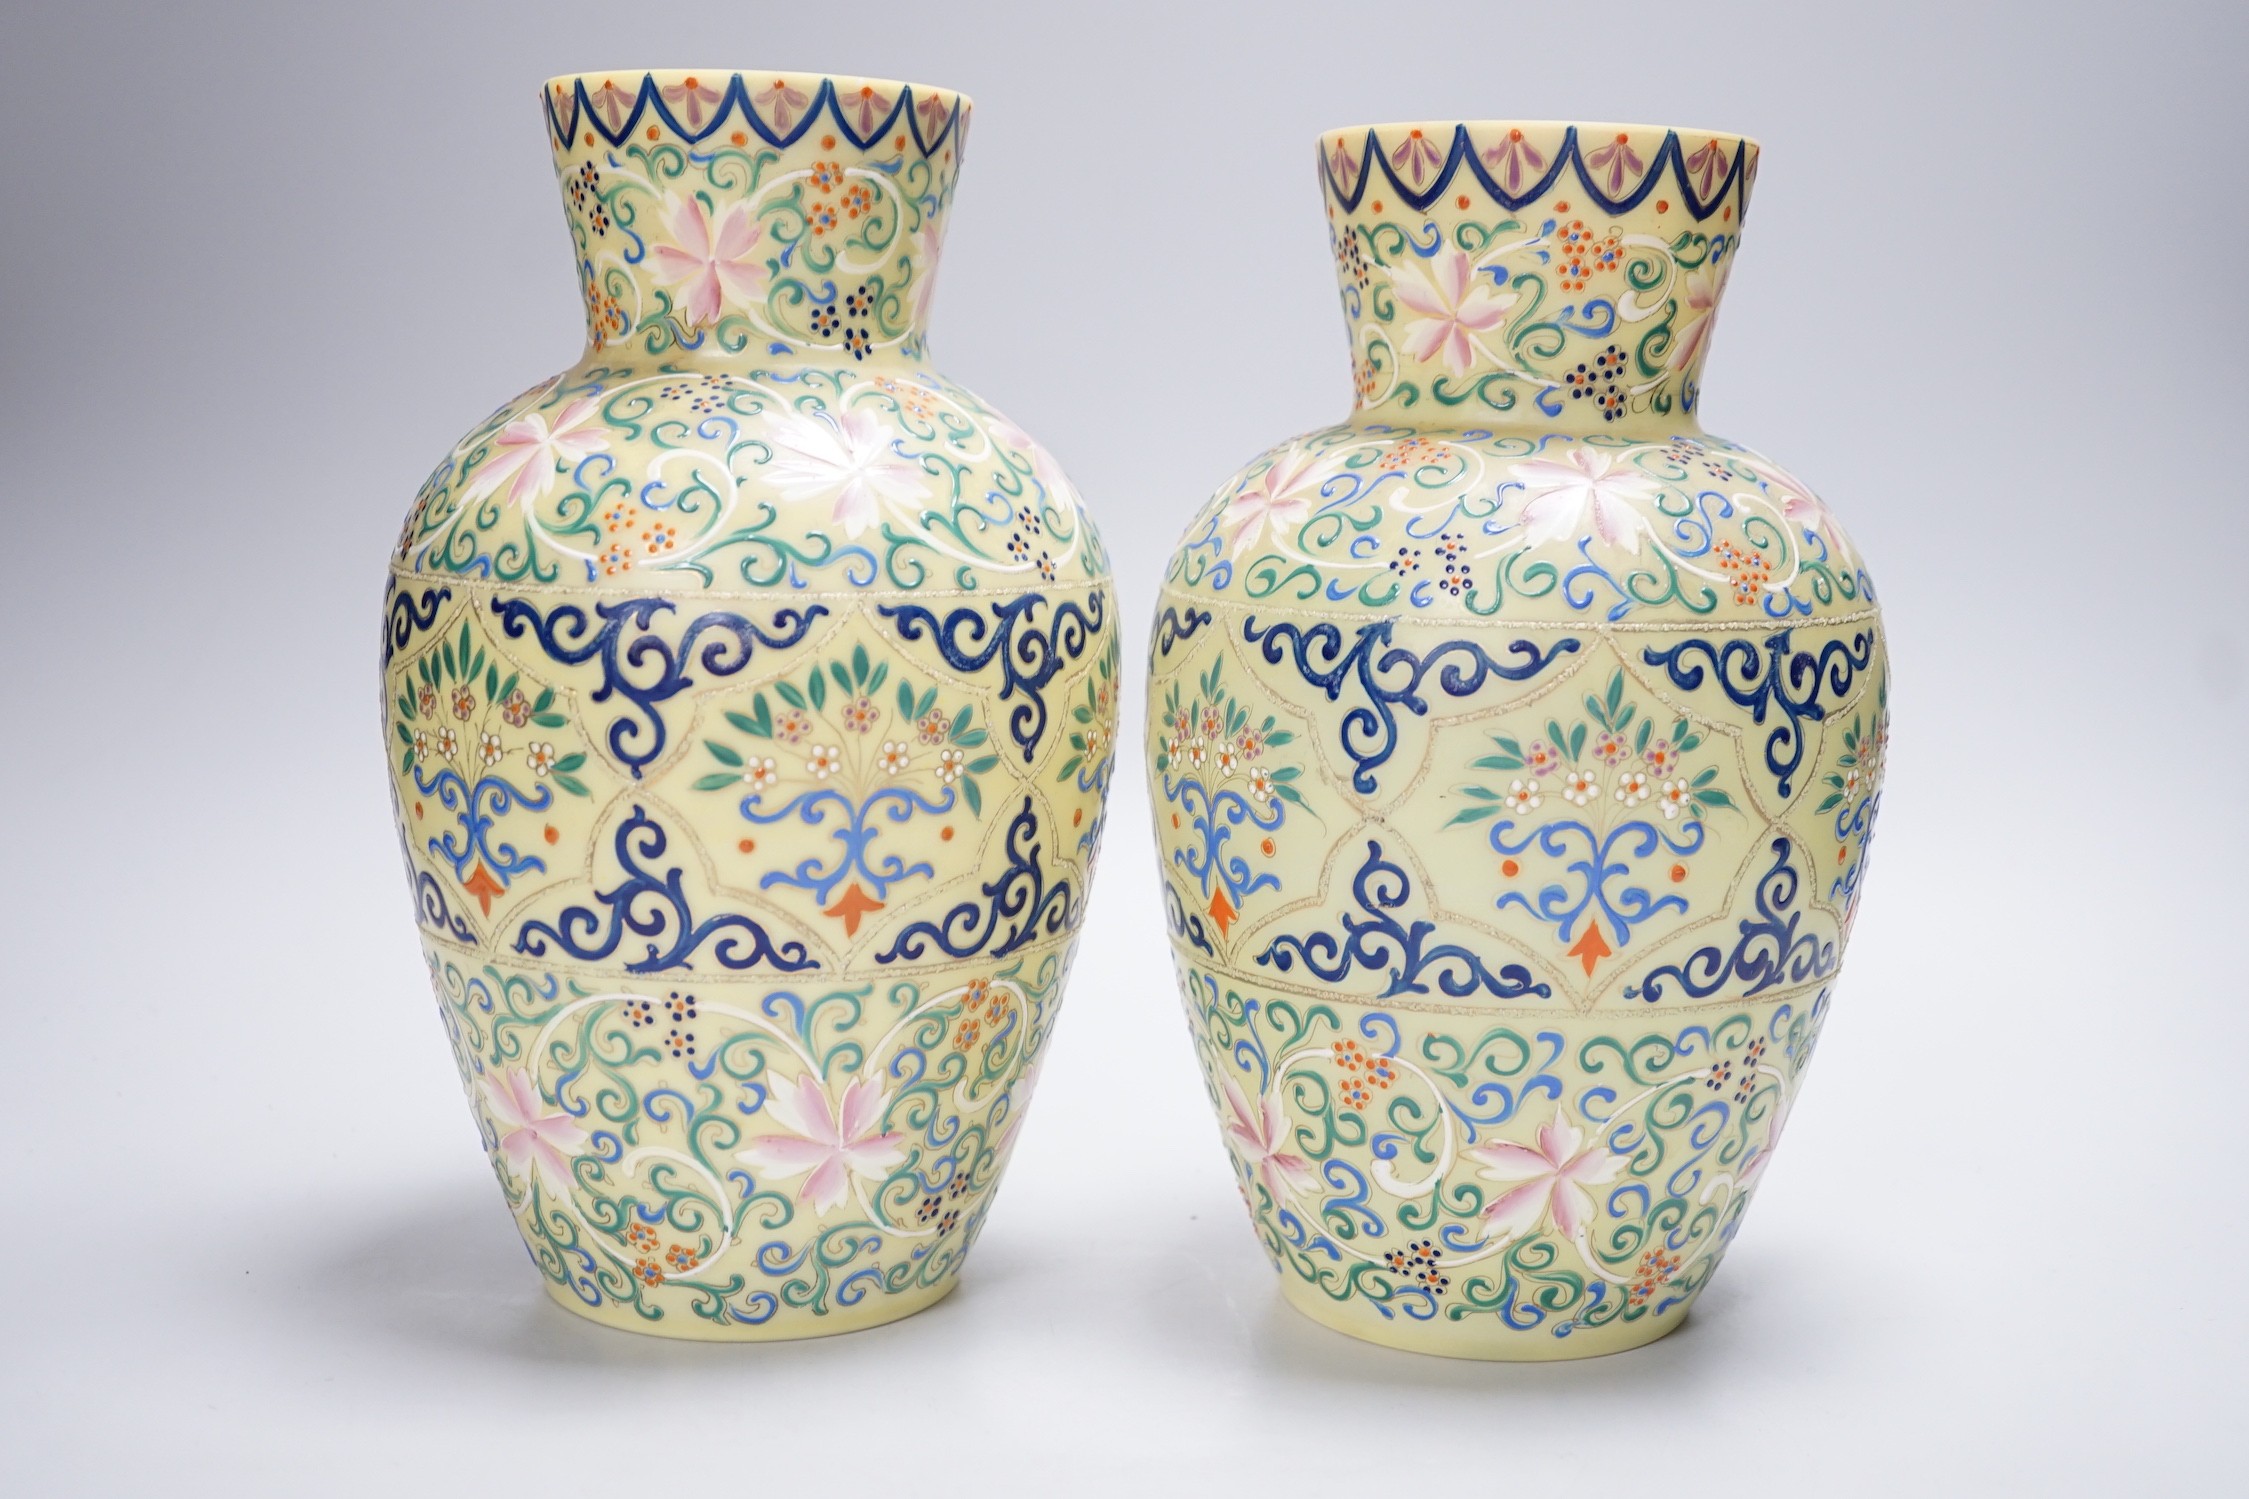 A pair of French enamelled glass vases, Persian inspired, 25.5cm - Image 2 of 4